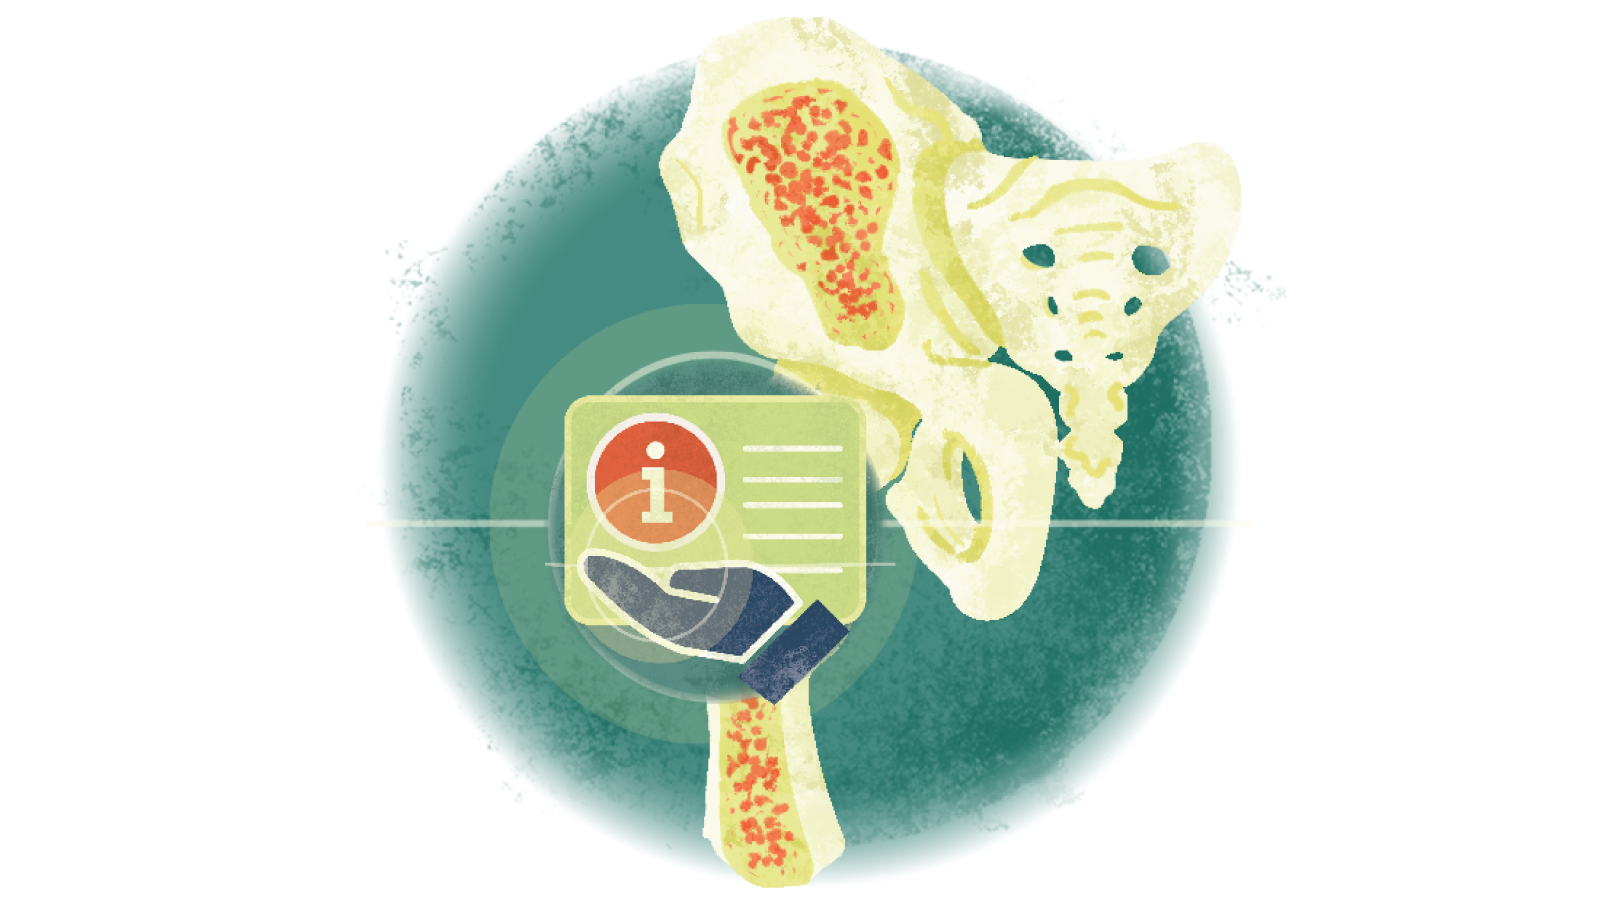 Illustration of the letter i over a hand over osteoporosis